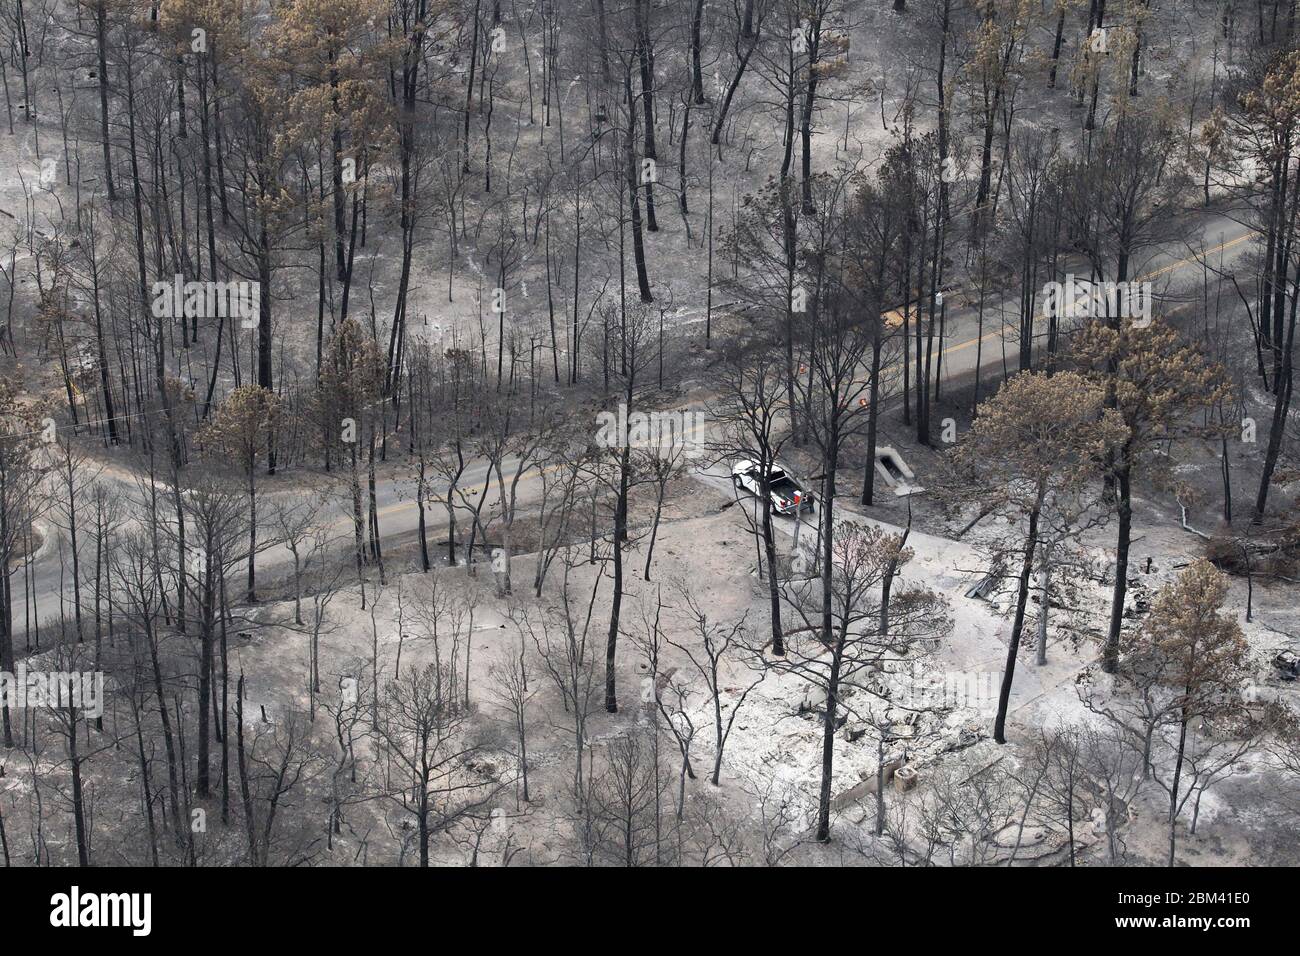 Bastrop County USA, September 16 2011: Aerial of fire damage where wildfires burned 38,000 acres and over 1,500 homes with two deaths reported. The trees in Bastrop State Park were the hardest hit with over 95% of the park acreage blackened or destroyed. ©Bob Daemmrich Stock Photo